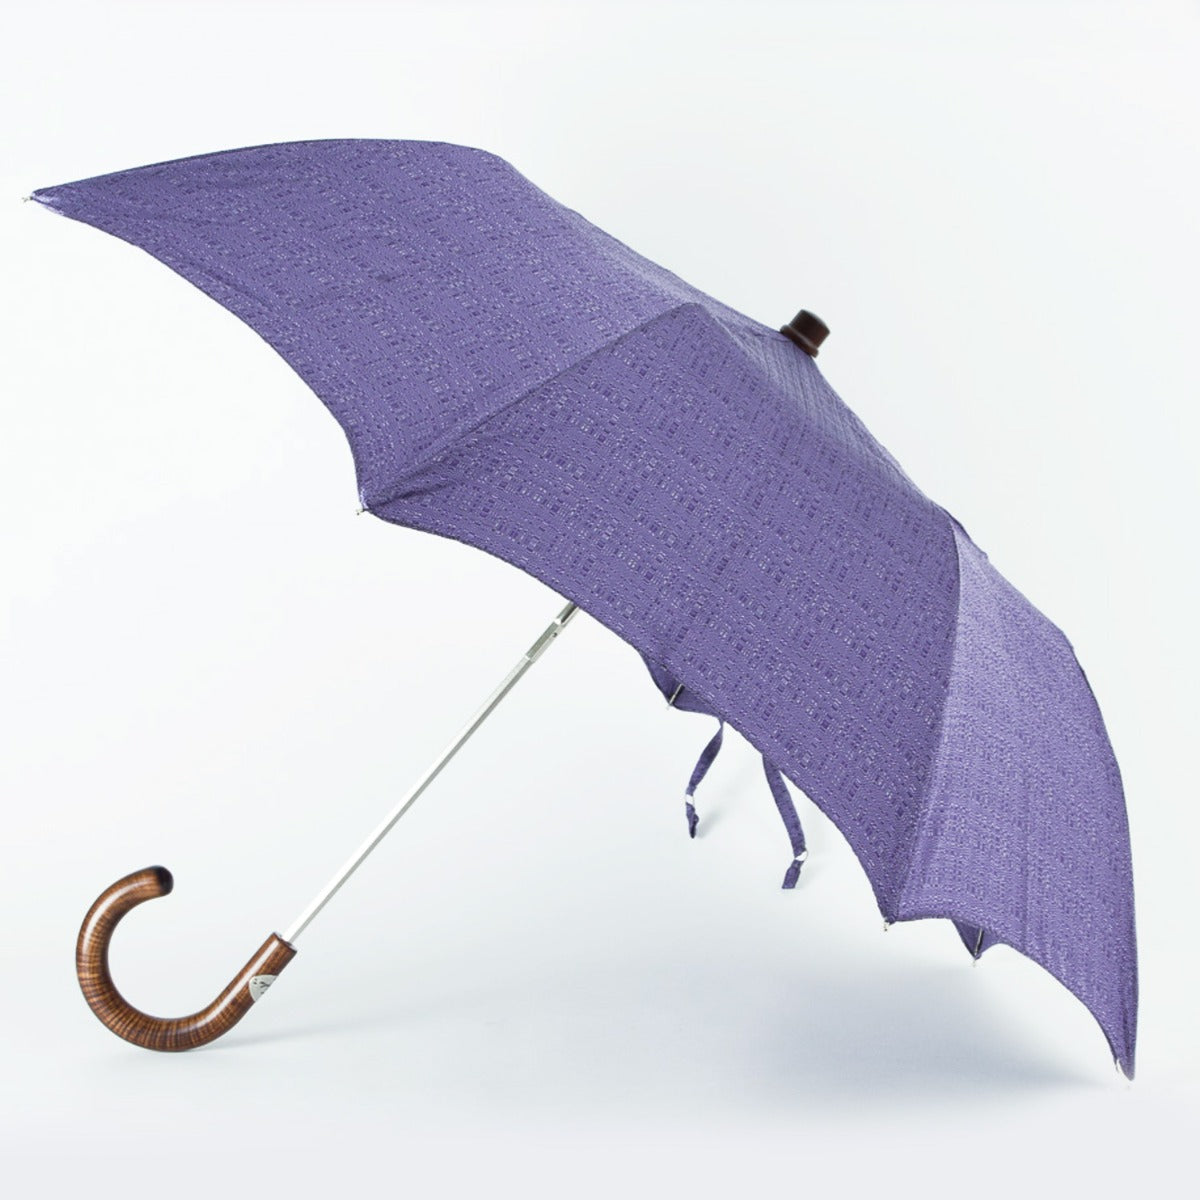 An Imperial Purple Travel Umbrella with Maple Handle from KirbyAllison.com on a white background.